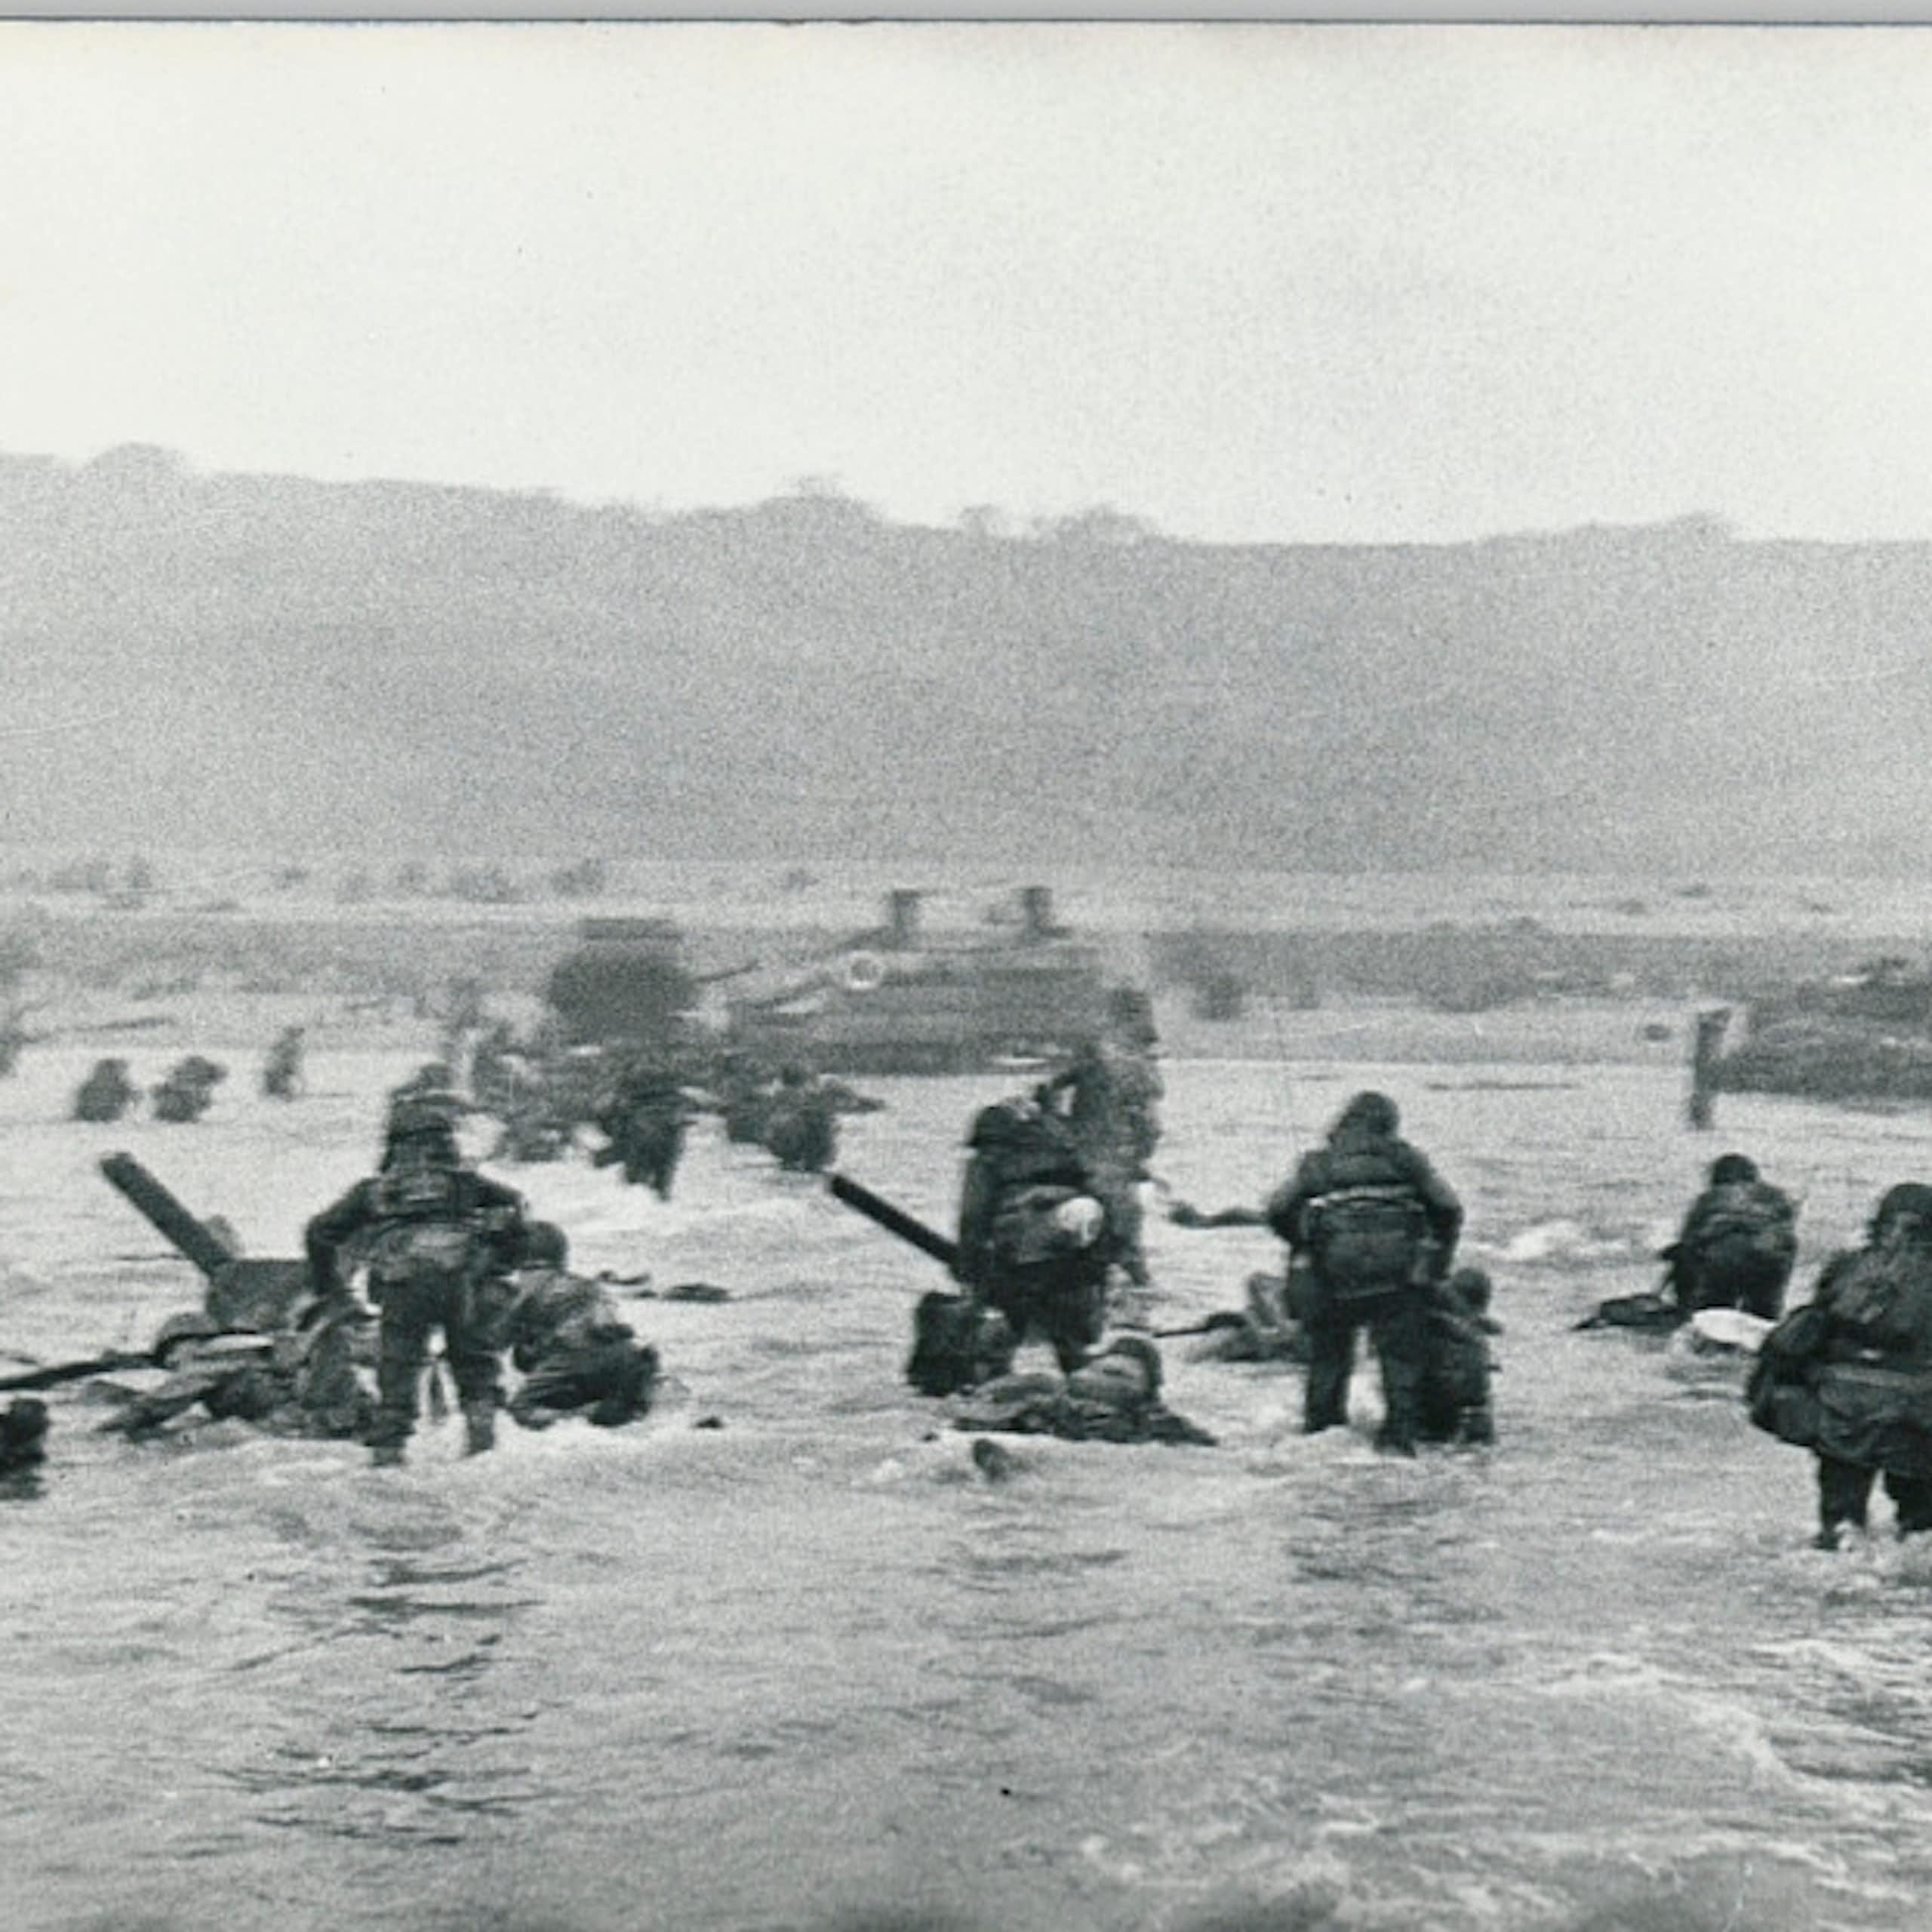 A black-and-white image shows soldiers wading through thigh-deep water toward a beach backed by cliffs.